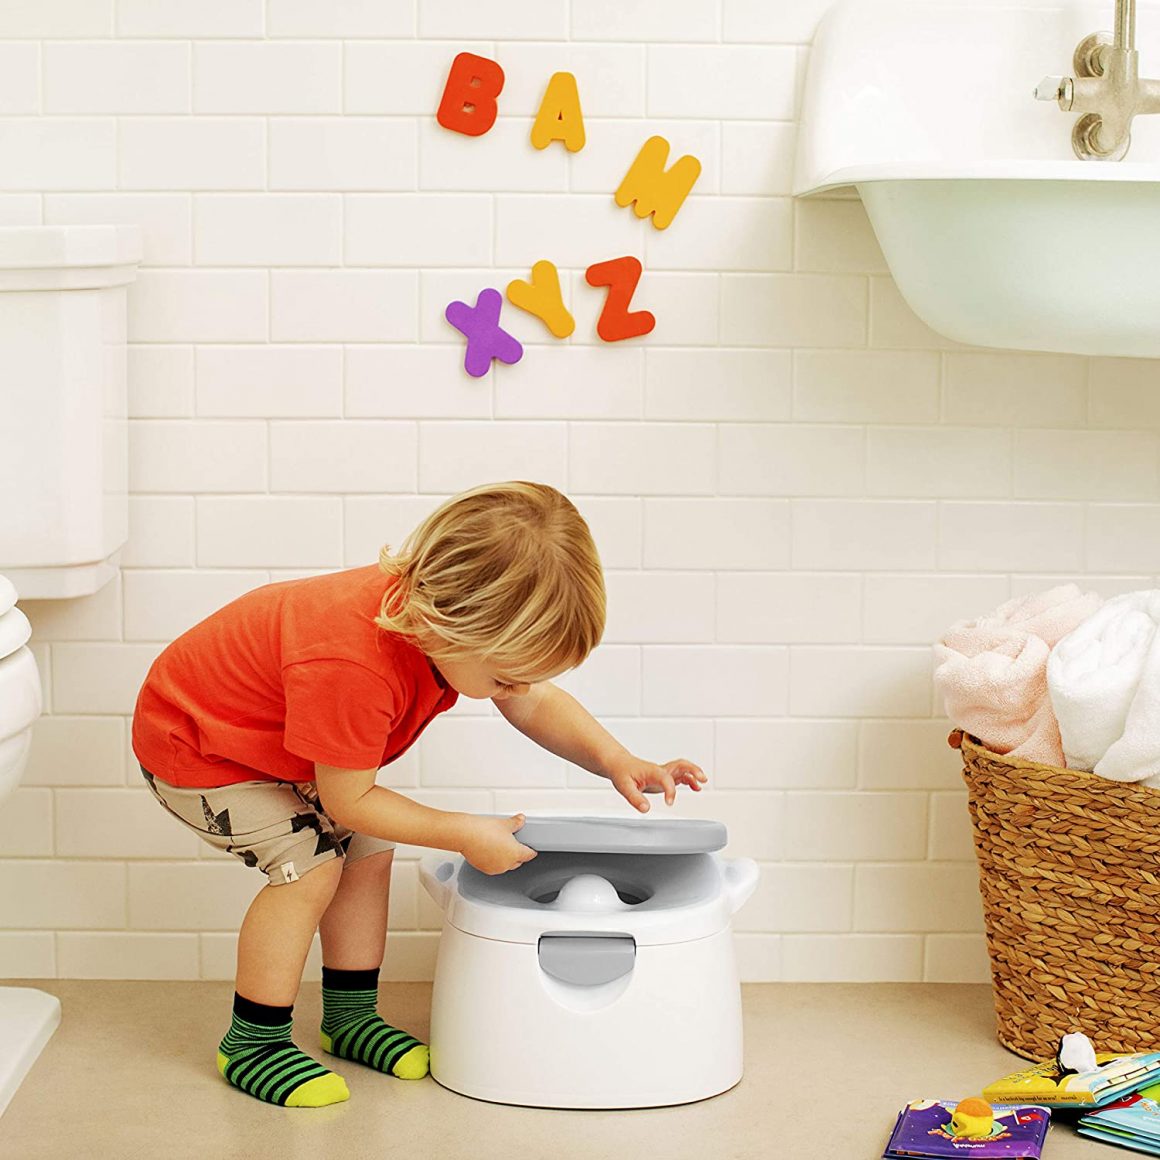 All-in-one potty chair and toilet seat option